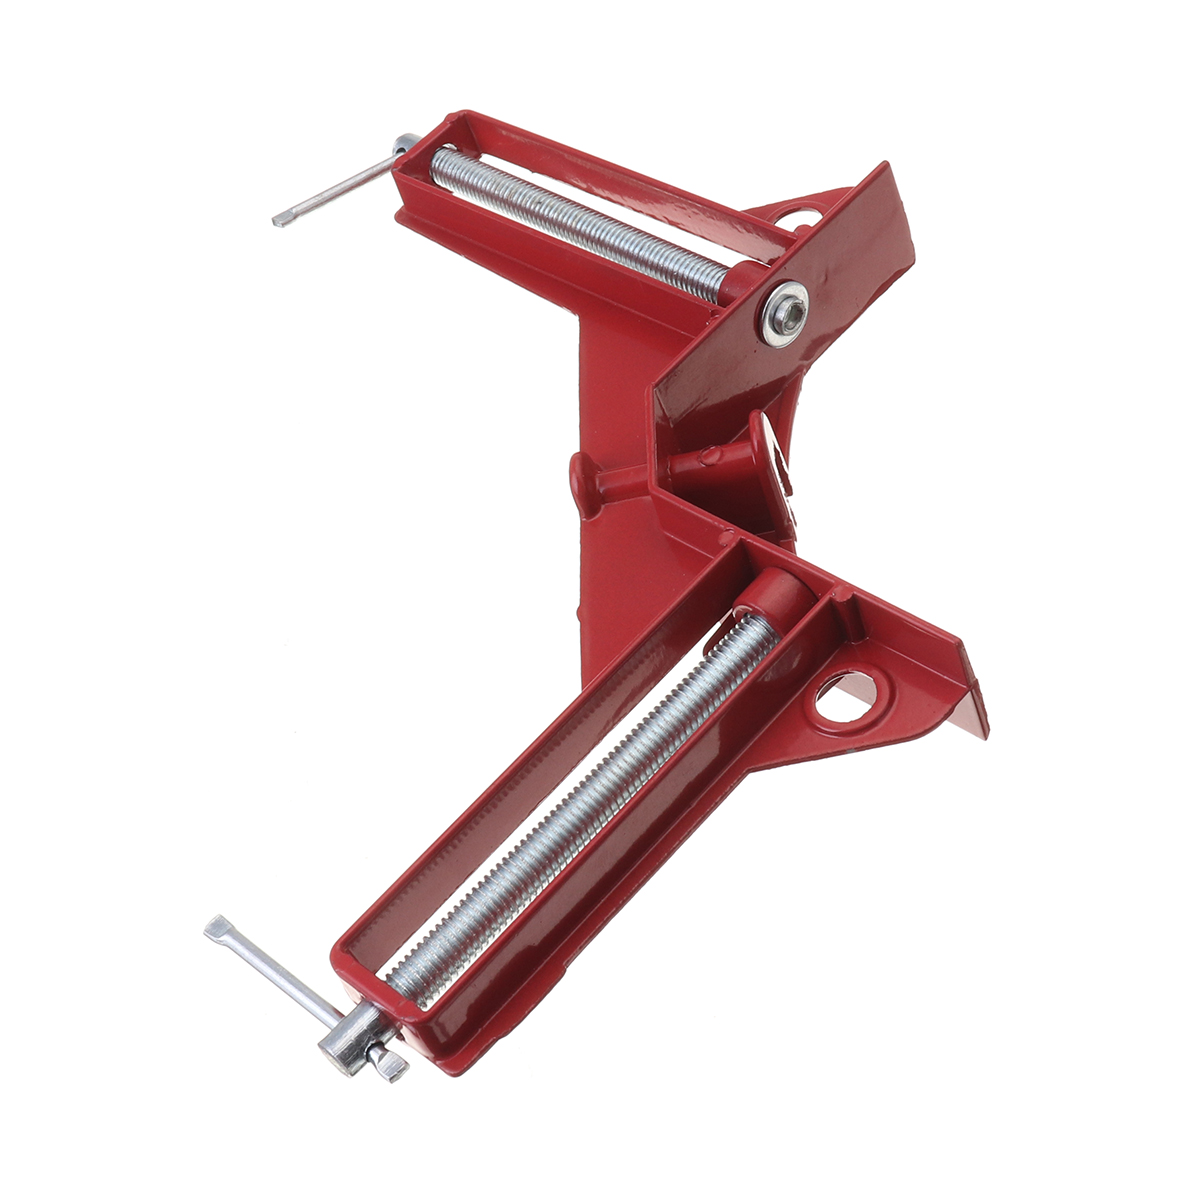 90-Degree-Right-Angle-Clamp-WoodWorking-Miter-Picture-Frame-Corner-Tank-Clip-Holder-1294798-8